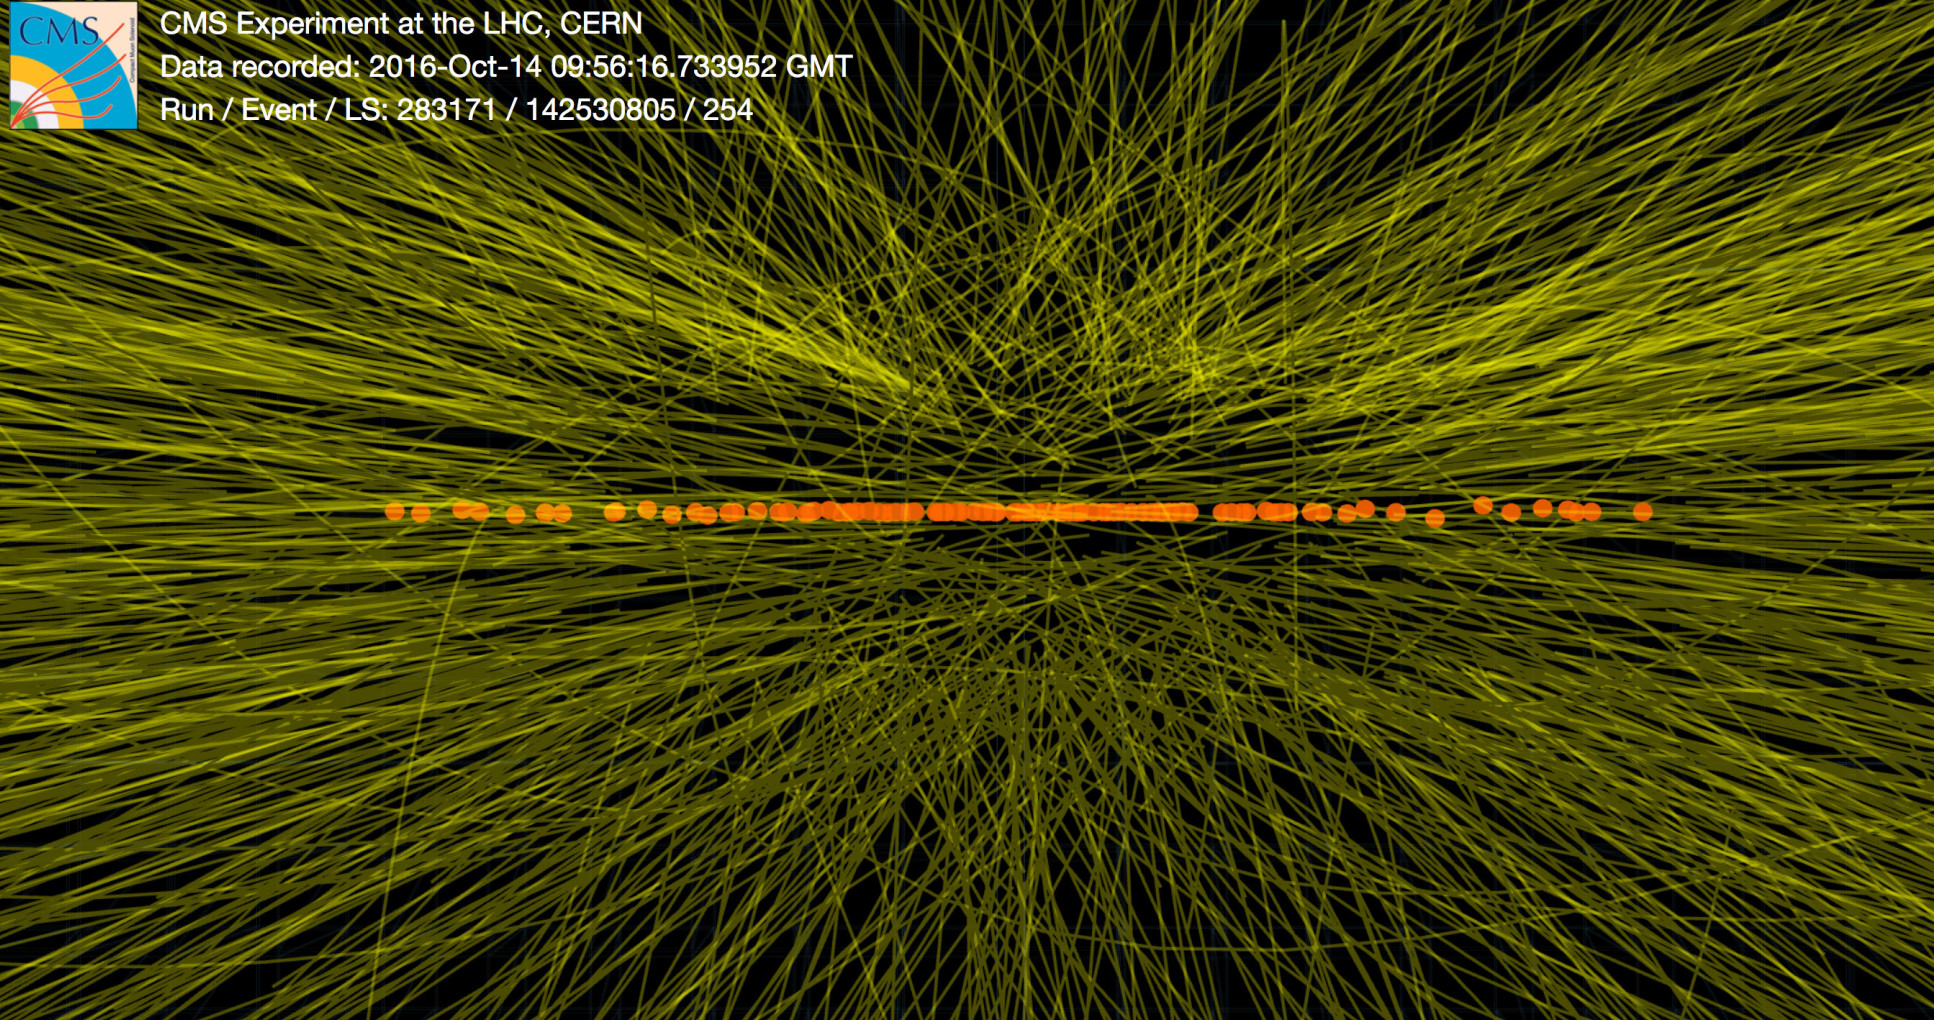 Approximately 100 simultaneous proton-proton collisions in an event recorded by the CMS experiment